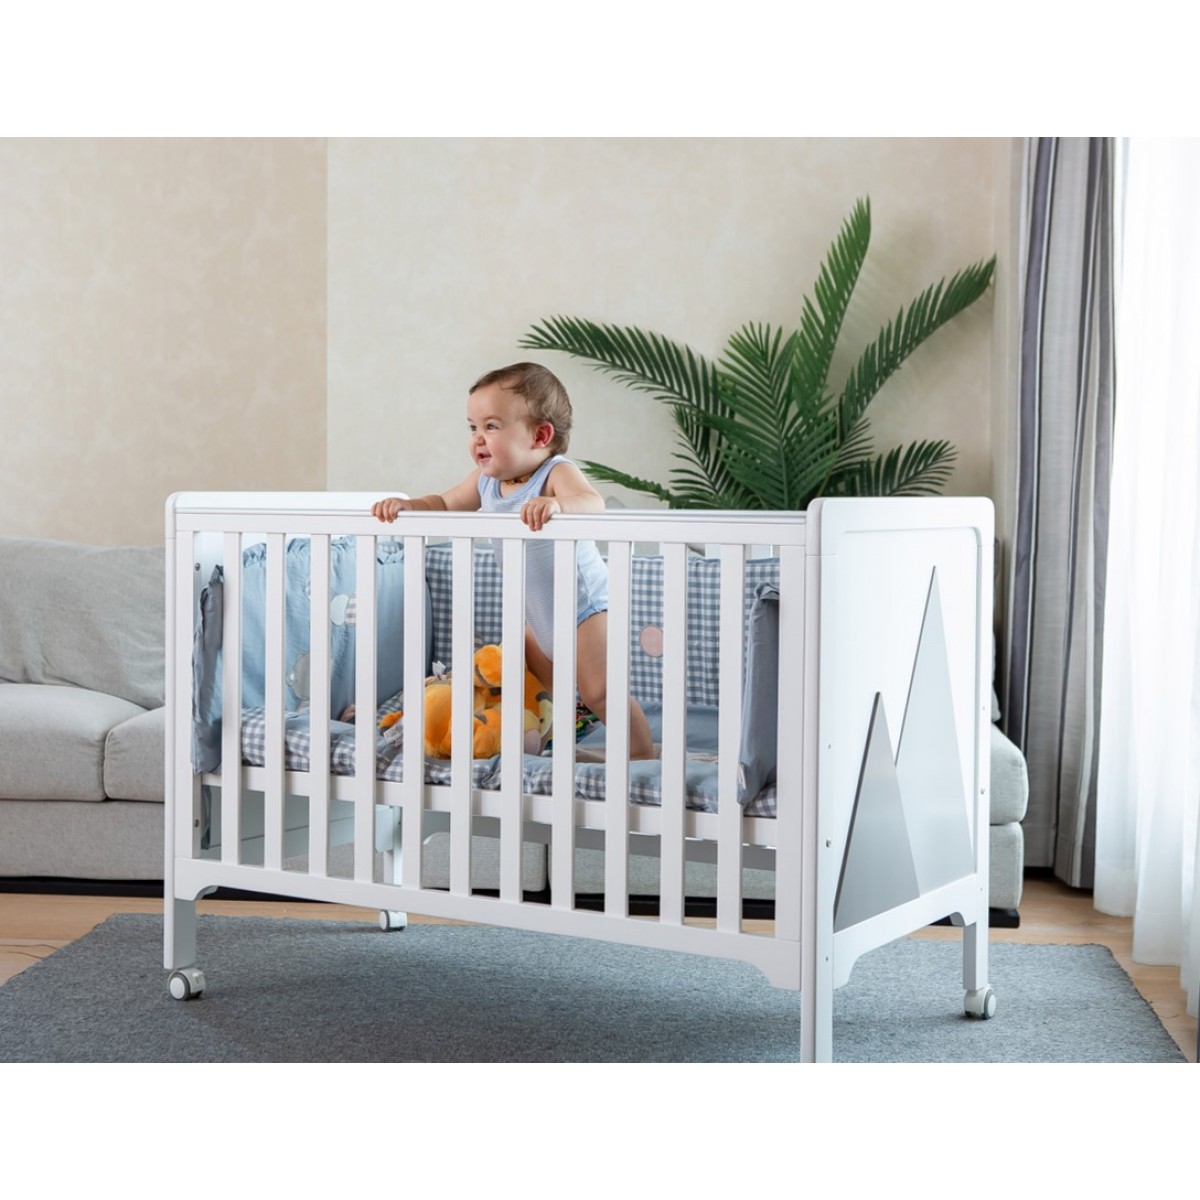 Baby Hill Crib Bed – White